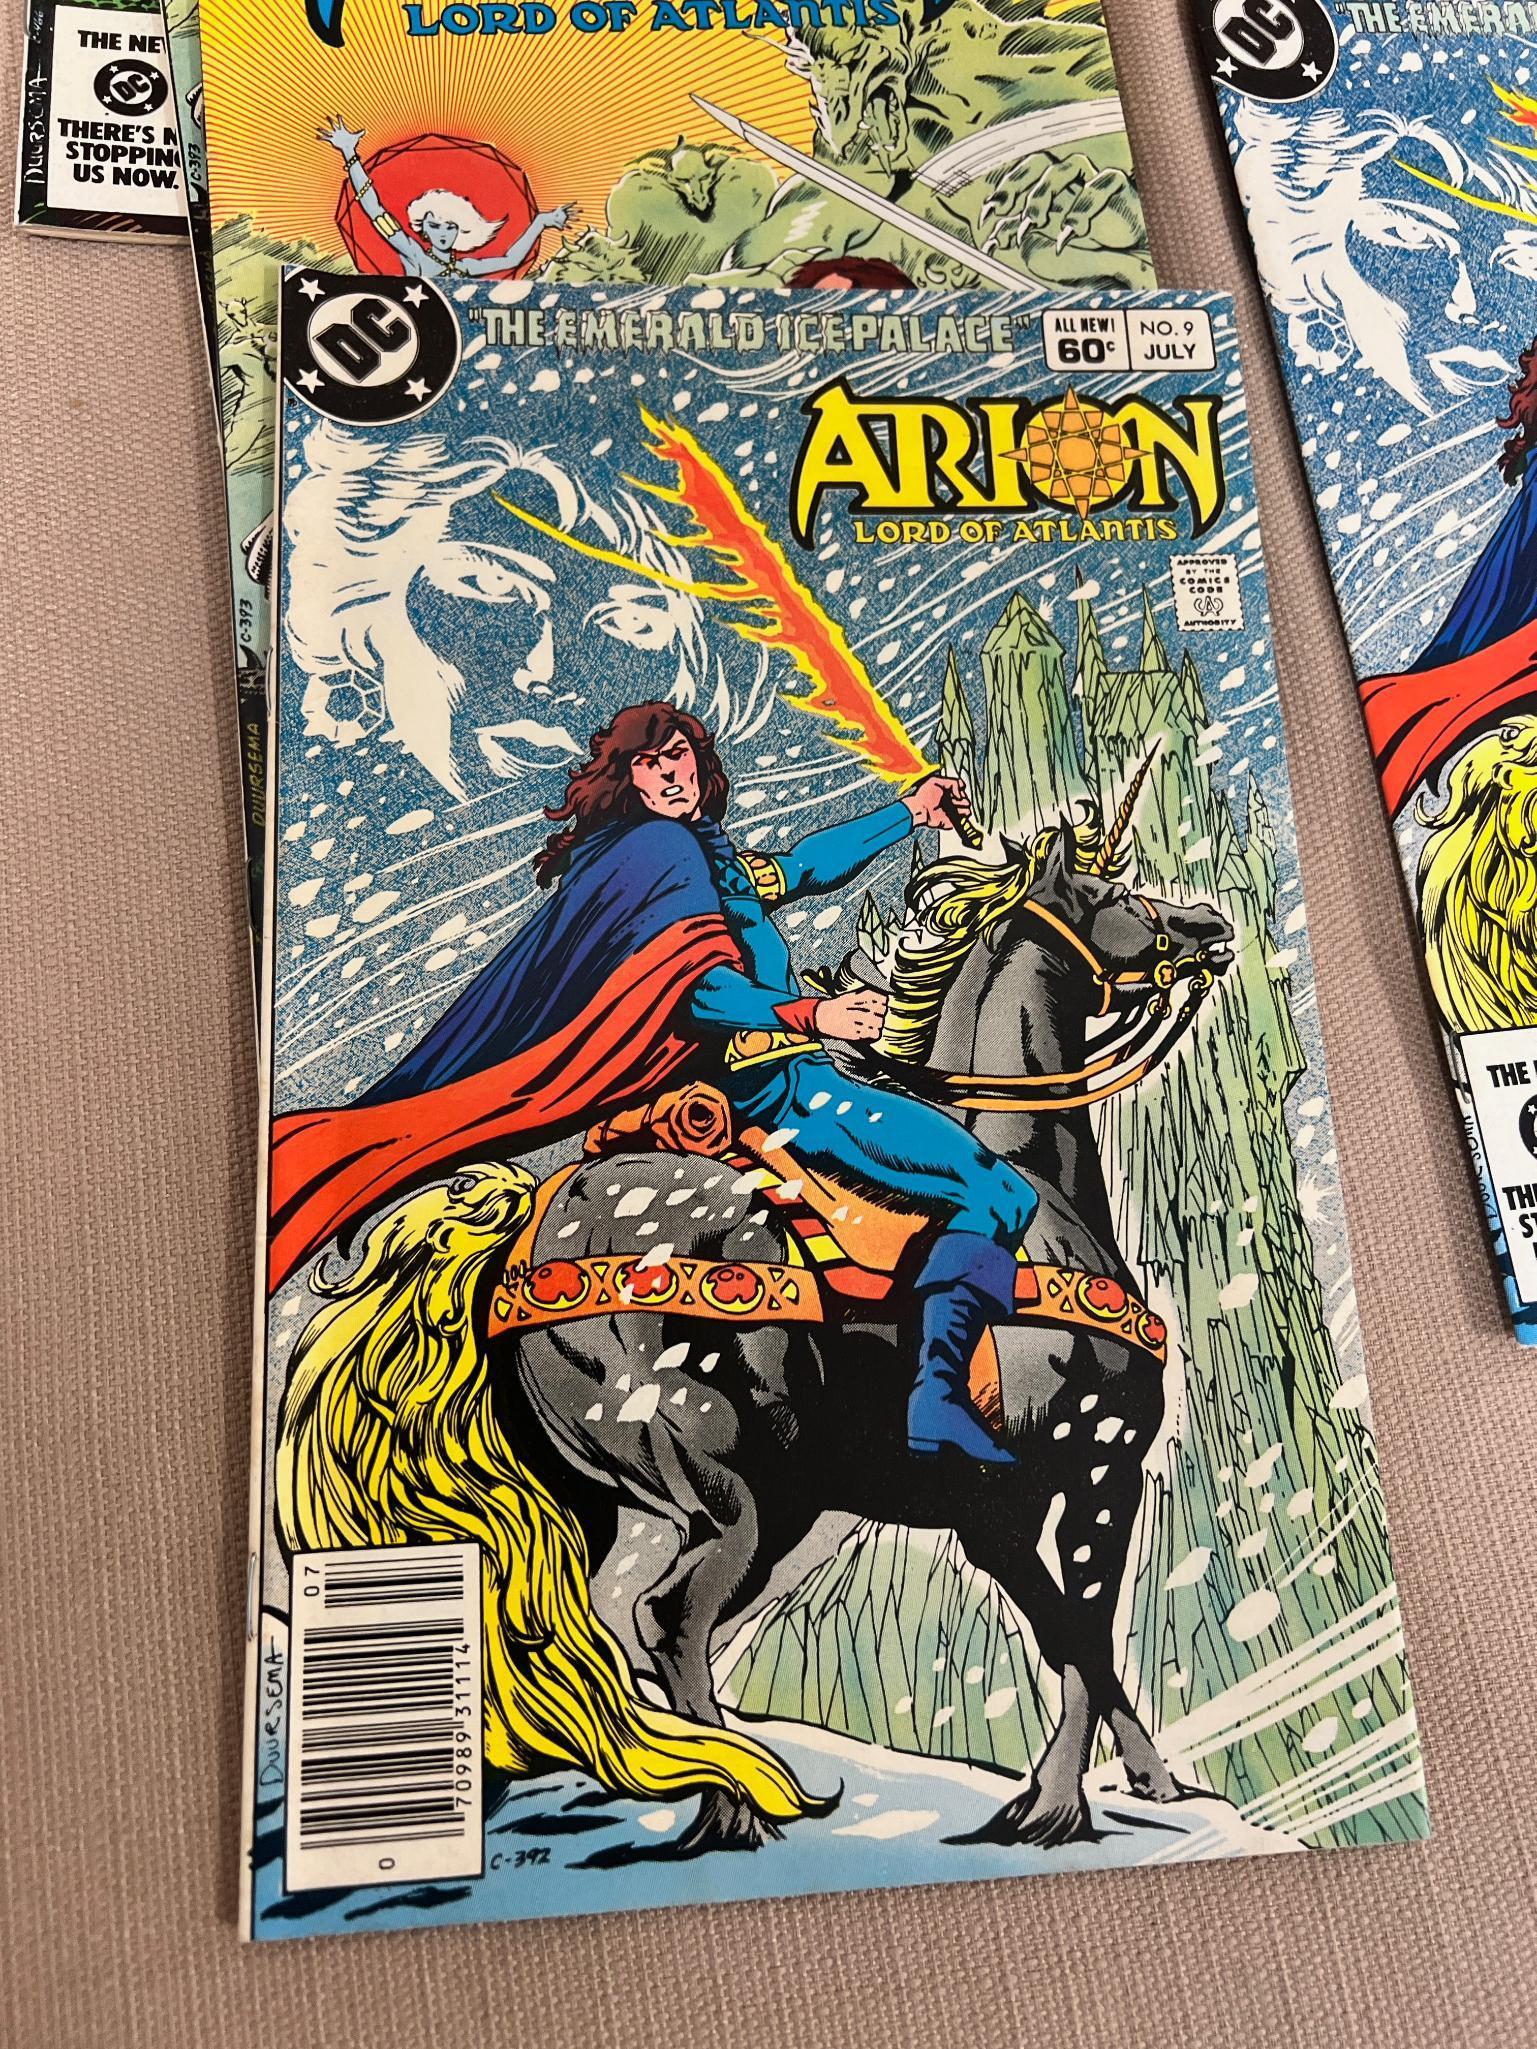 Fallen Angels 1-8 and 13 Various issues of Arion incl no. 1